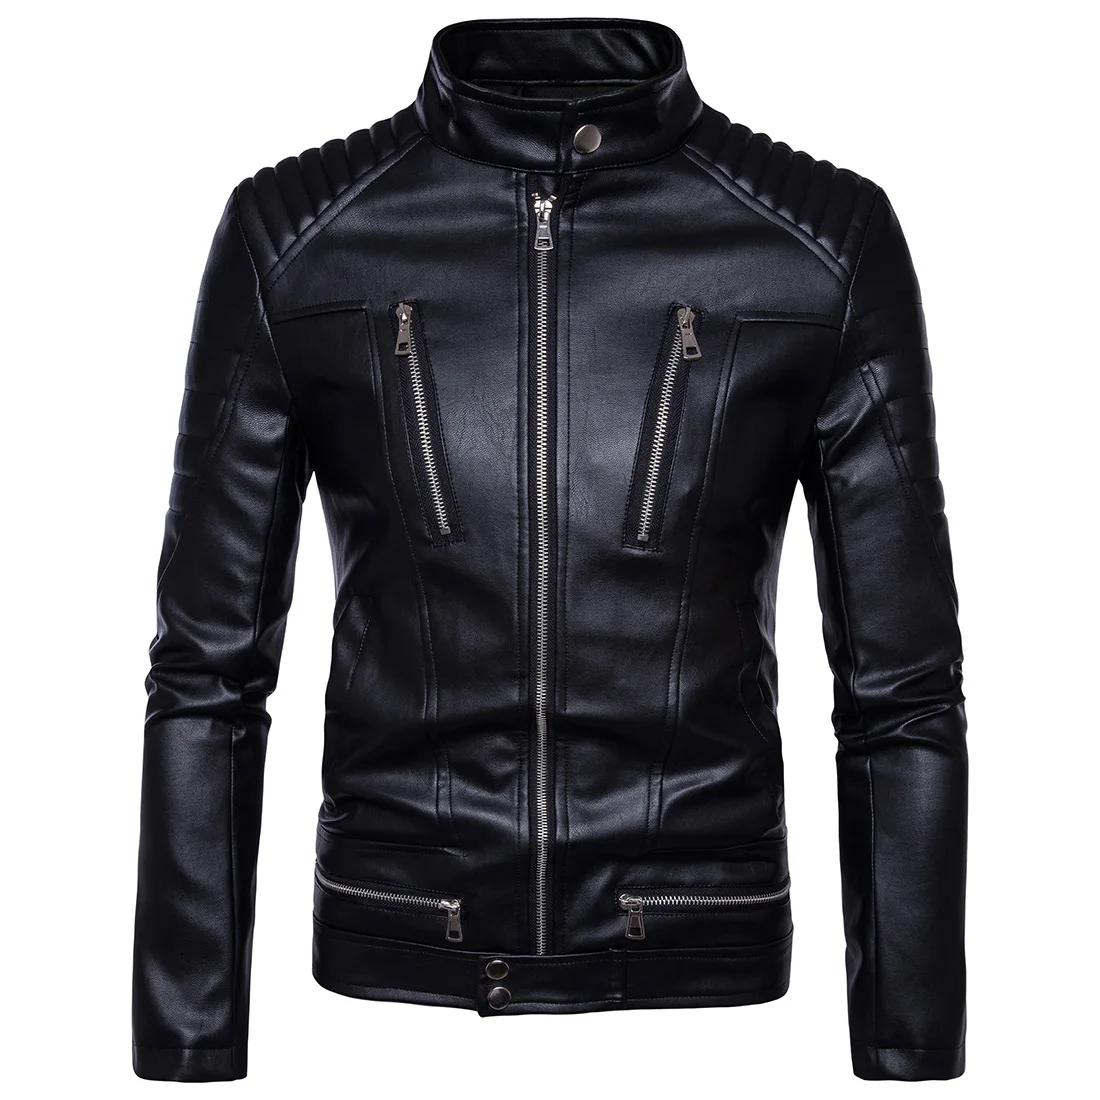 

Mens Bomber Jackets Fashion Men Faux Leather Coat Zipper Overcoat Motor Jacket Motorcycle Bikers Punk Man Brand Top Colthing